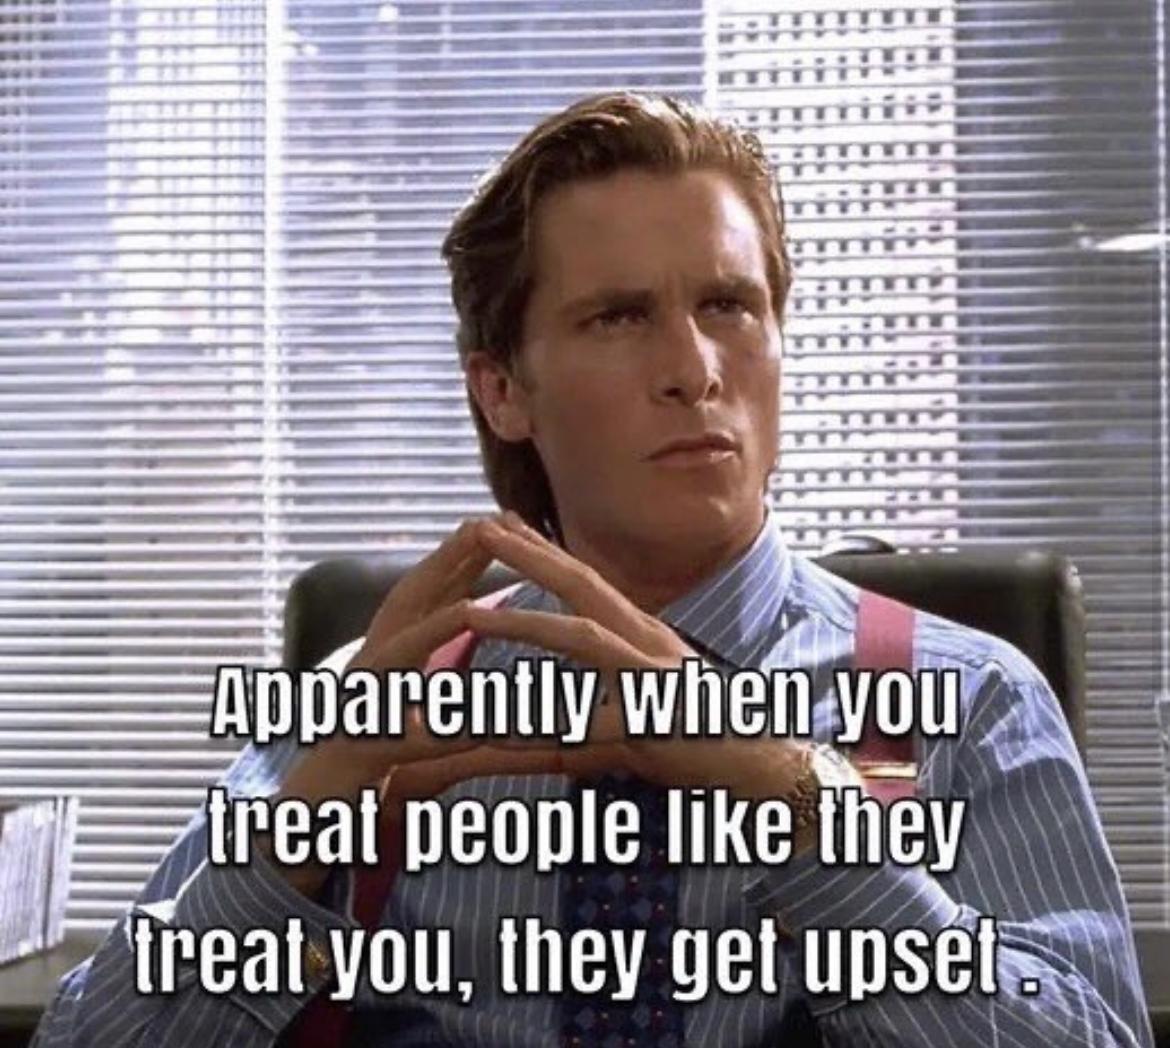 memes and quotes that speak truth - photo caption - Apparently when you treat people they treat you, they get upset.